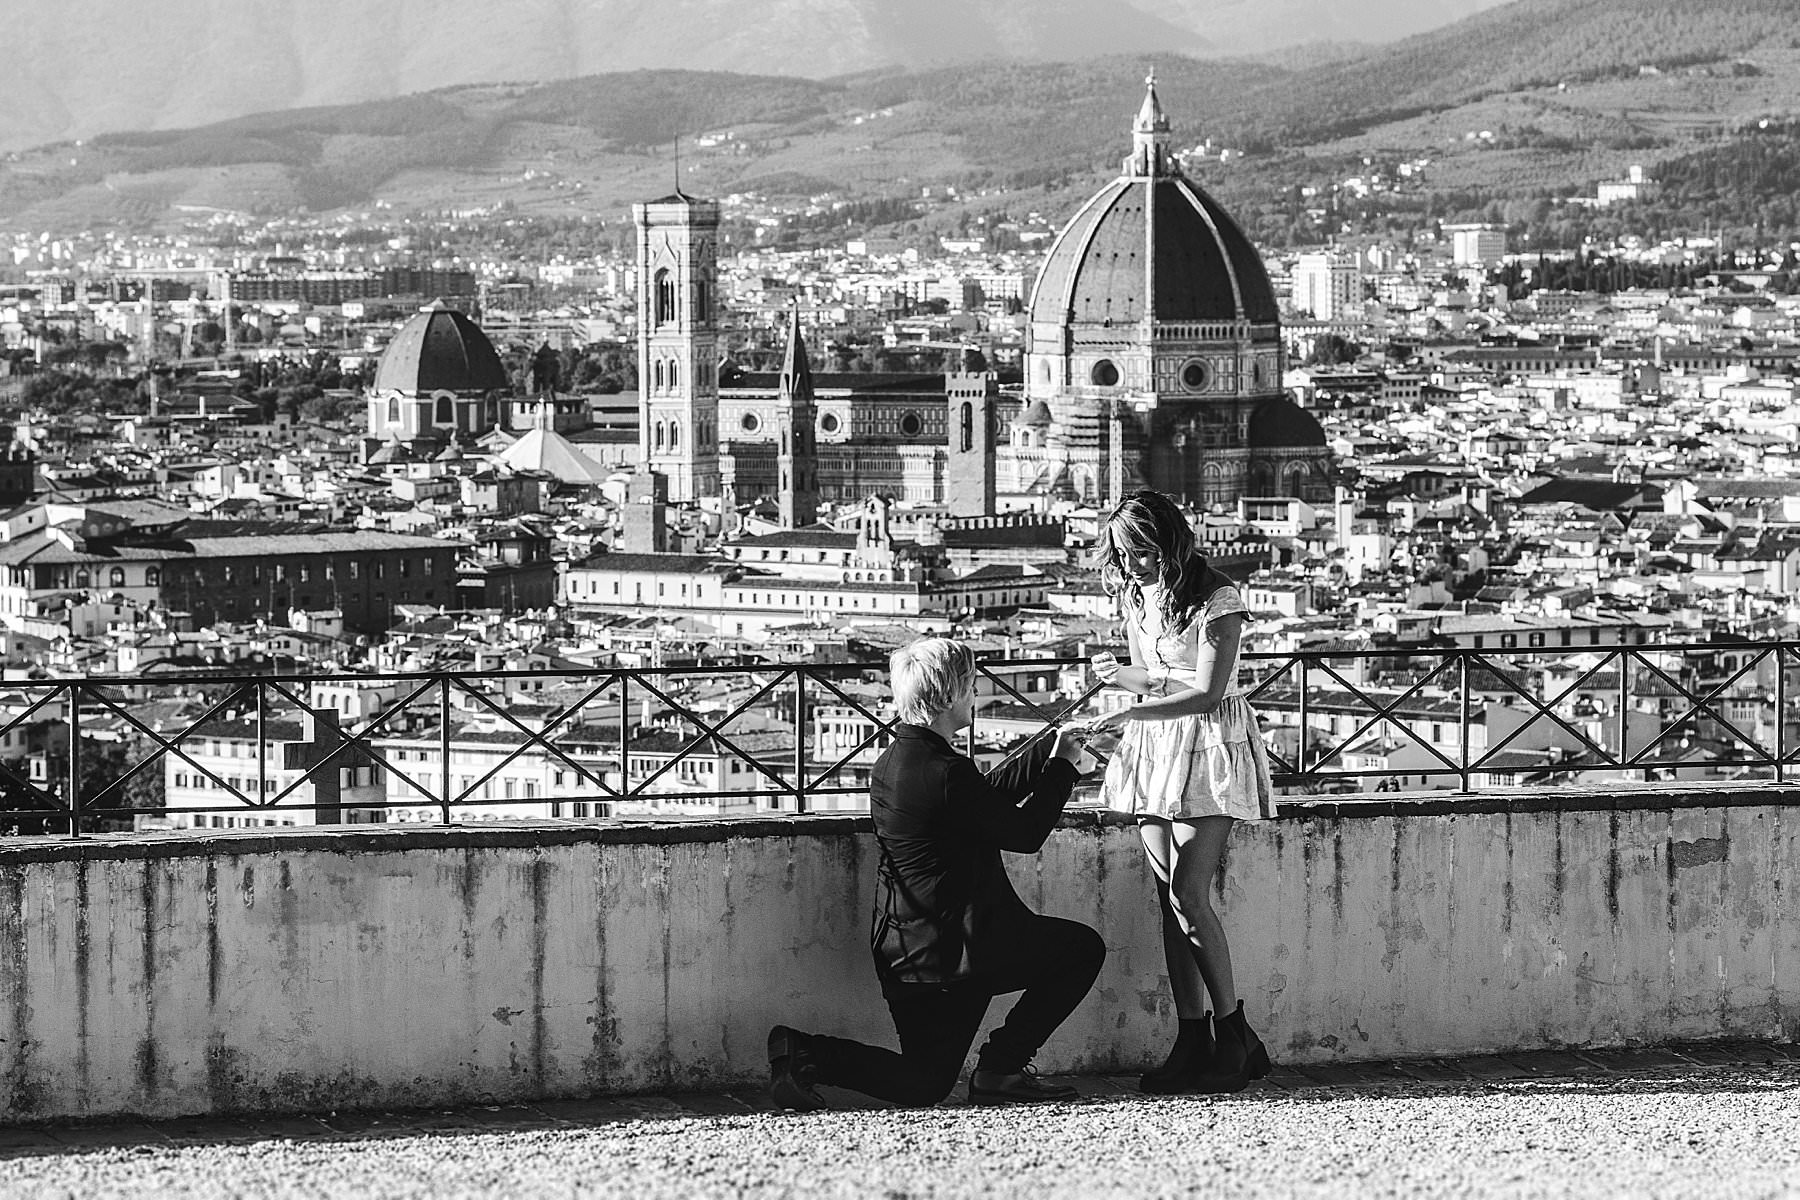 Brady, a young man from California, was looking for a photographer for his proposal in Florence. He wanted to surprise his girlfriend Susy kneeling in front of the best view of the city and of its Cathedral, for a guaranteed wow-factor.